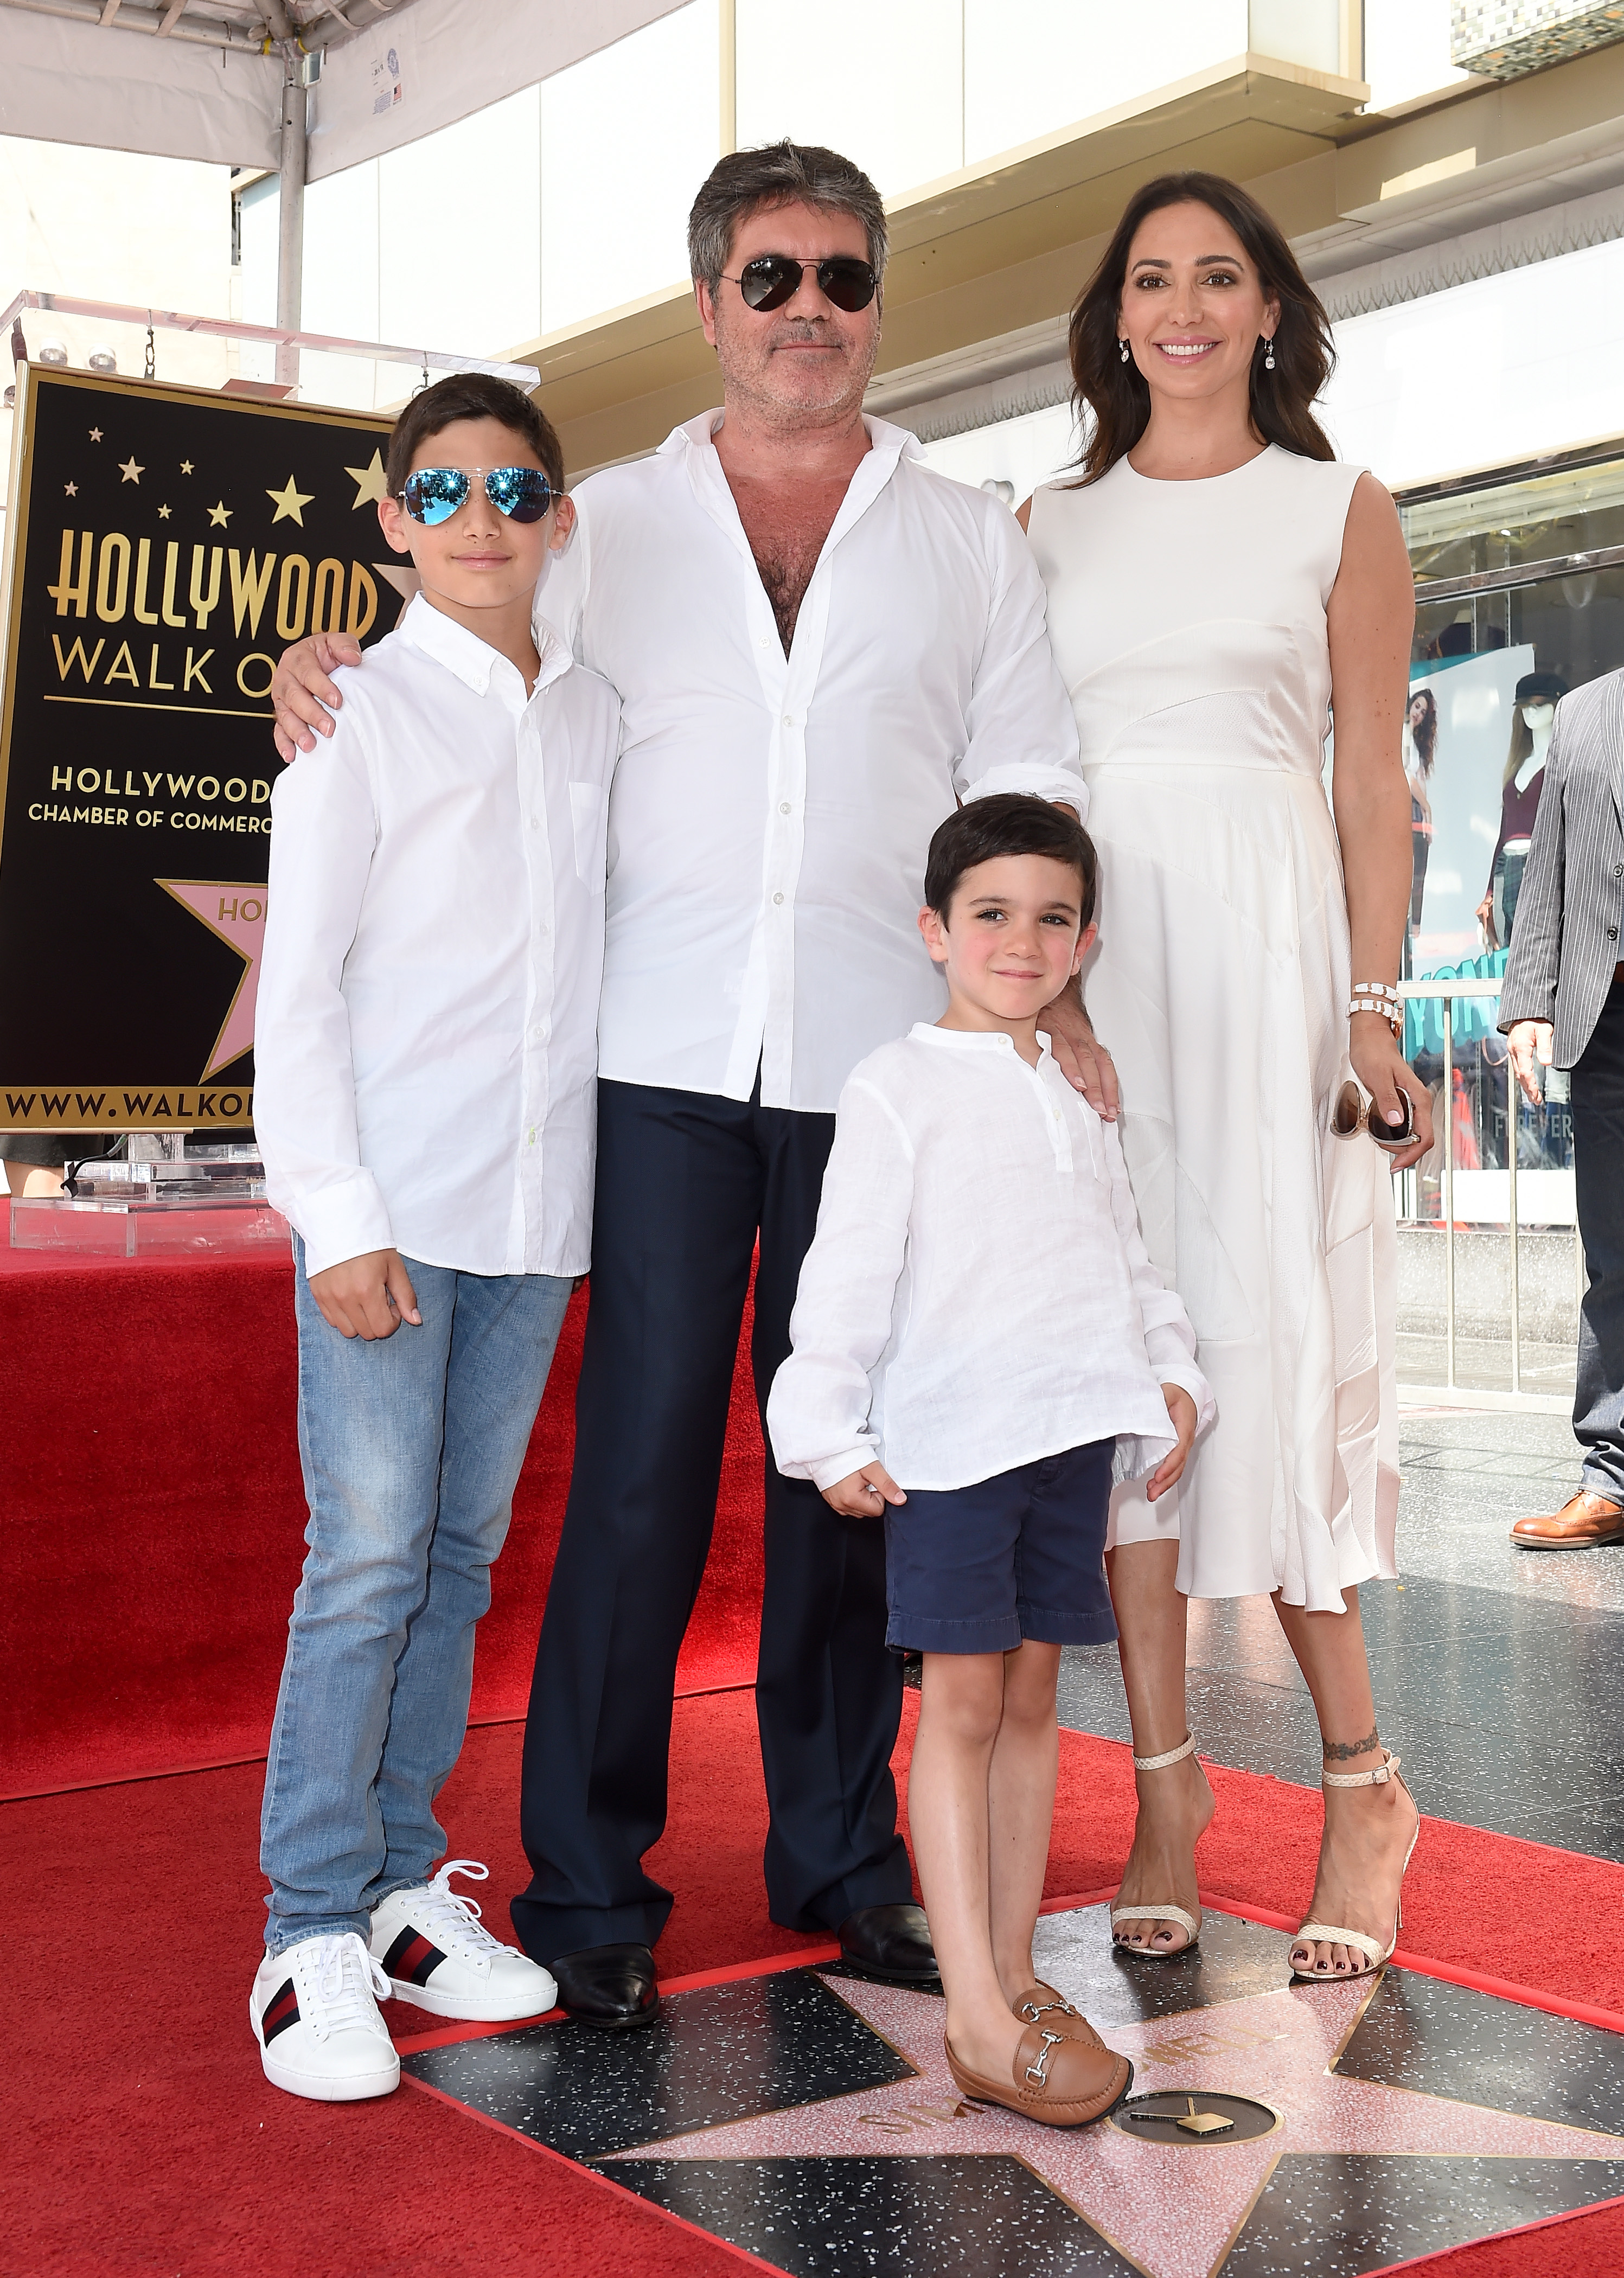 Simon Cowell, Lauren Silverman, Eric Cowell and Adam Silverman in California on August 22, 2018 | Source: Getty Images